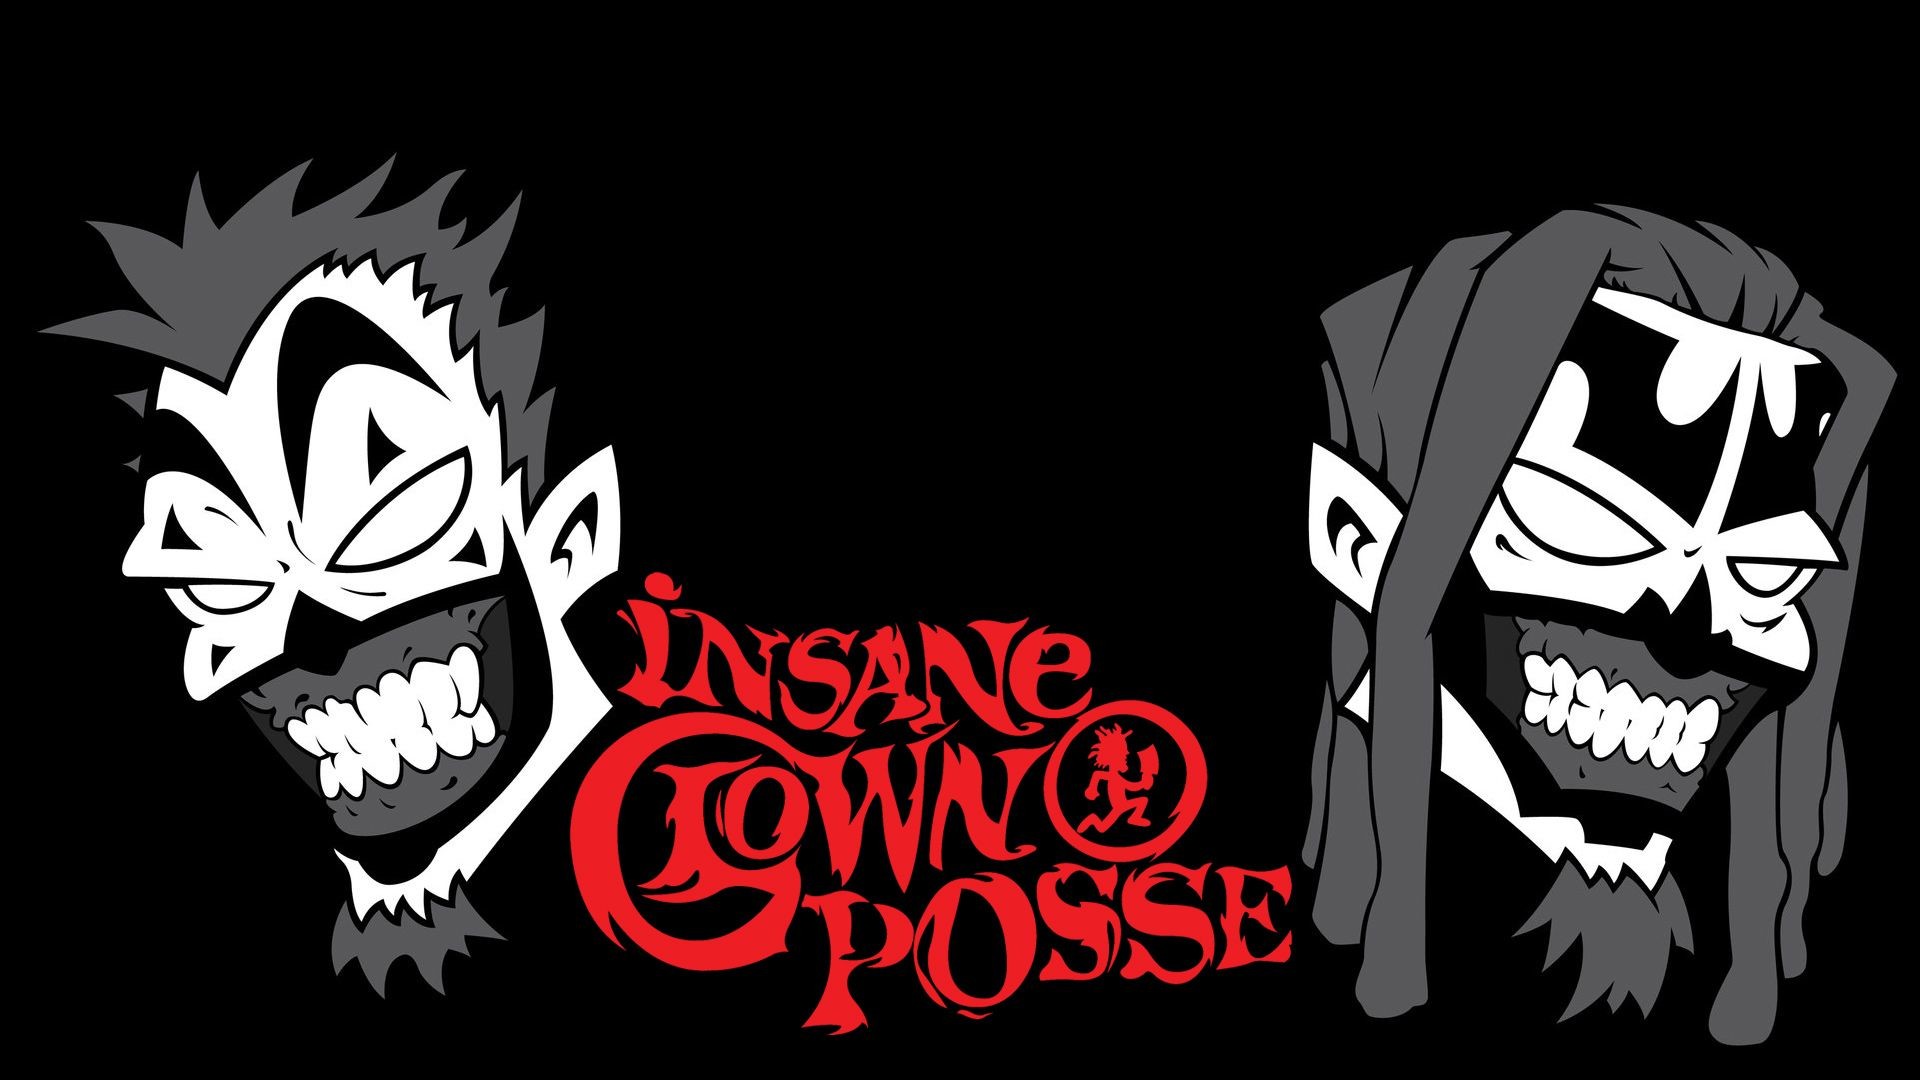 1920x1080 Insane Clown Posse (ICP) is an American hip hop duo from Detroit, Michigan.  Description from pixgood.com. I searched for this on bing.com/images